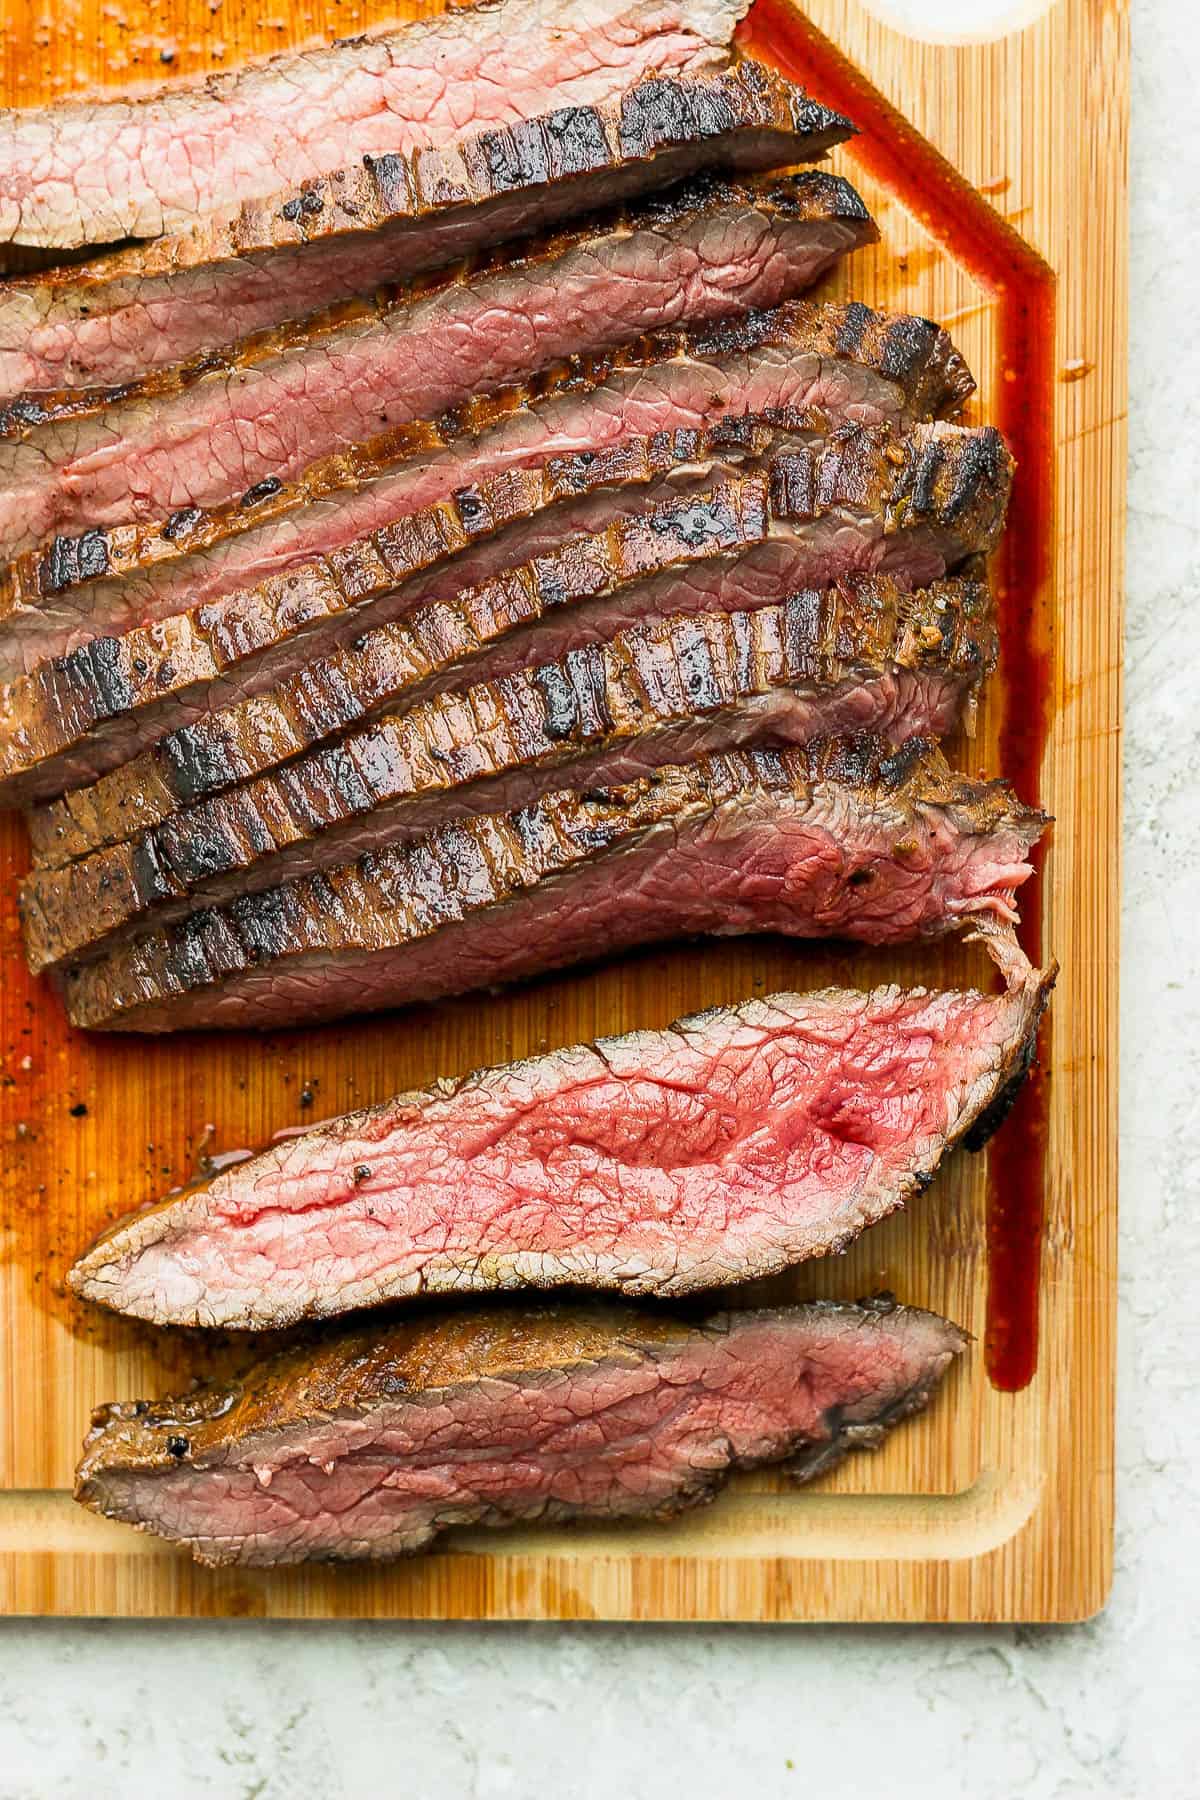 The cooked flank steak cut into strips on a cutting board.